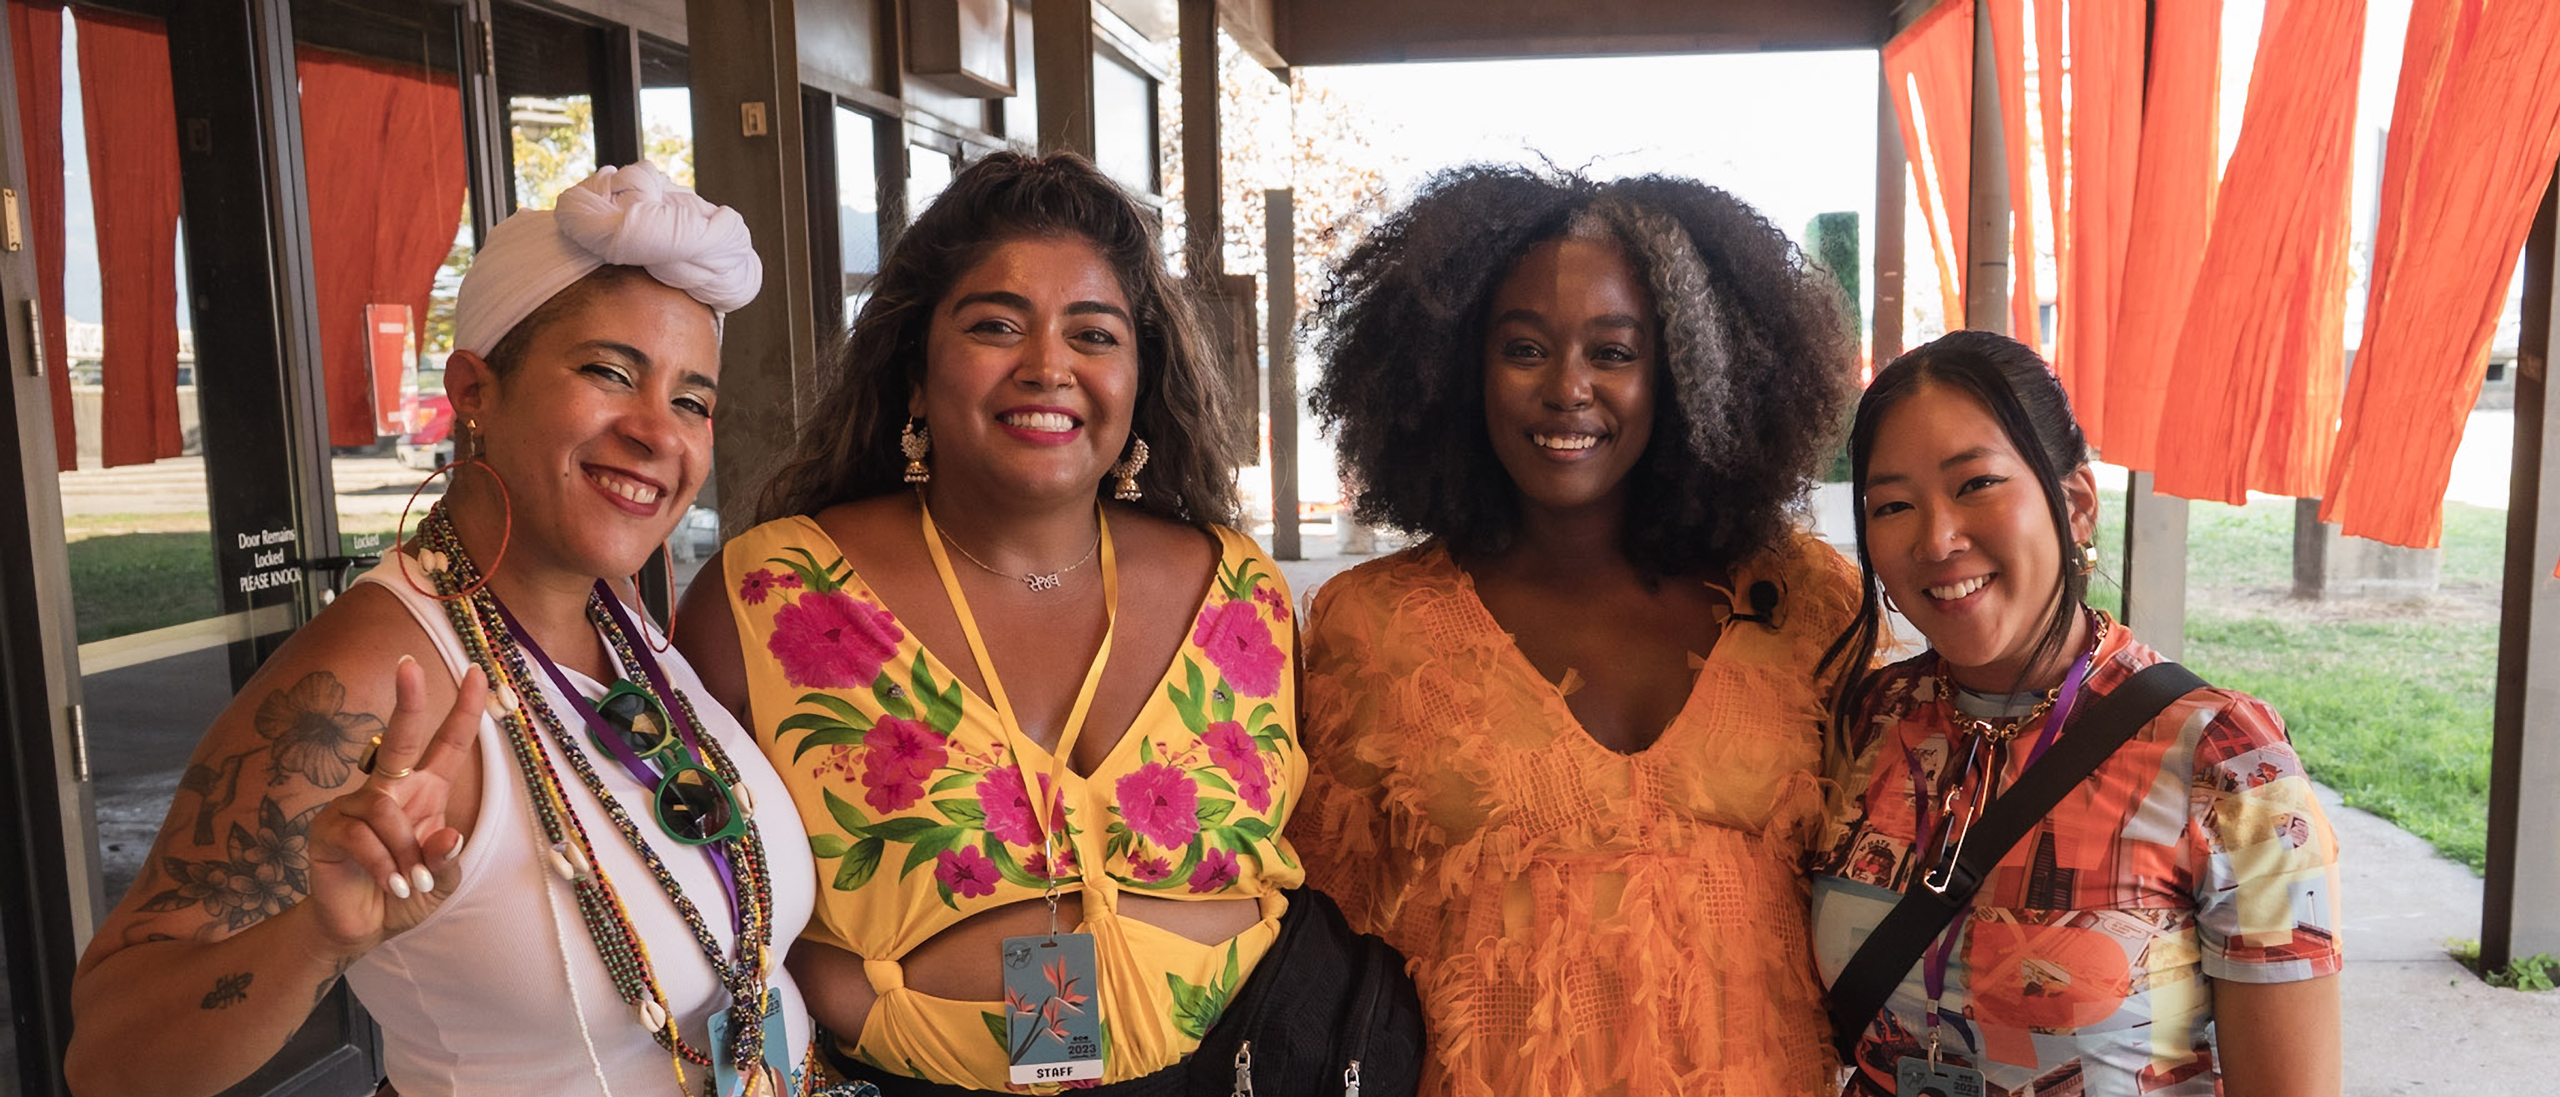 Nomadness Fest draws Black influencers to Louisville The Group Travel